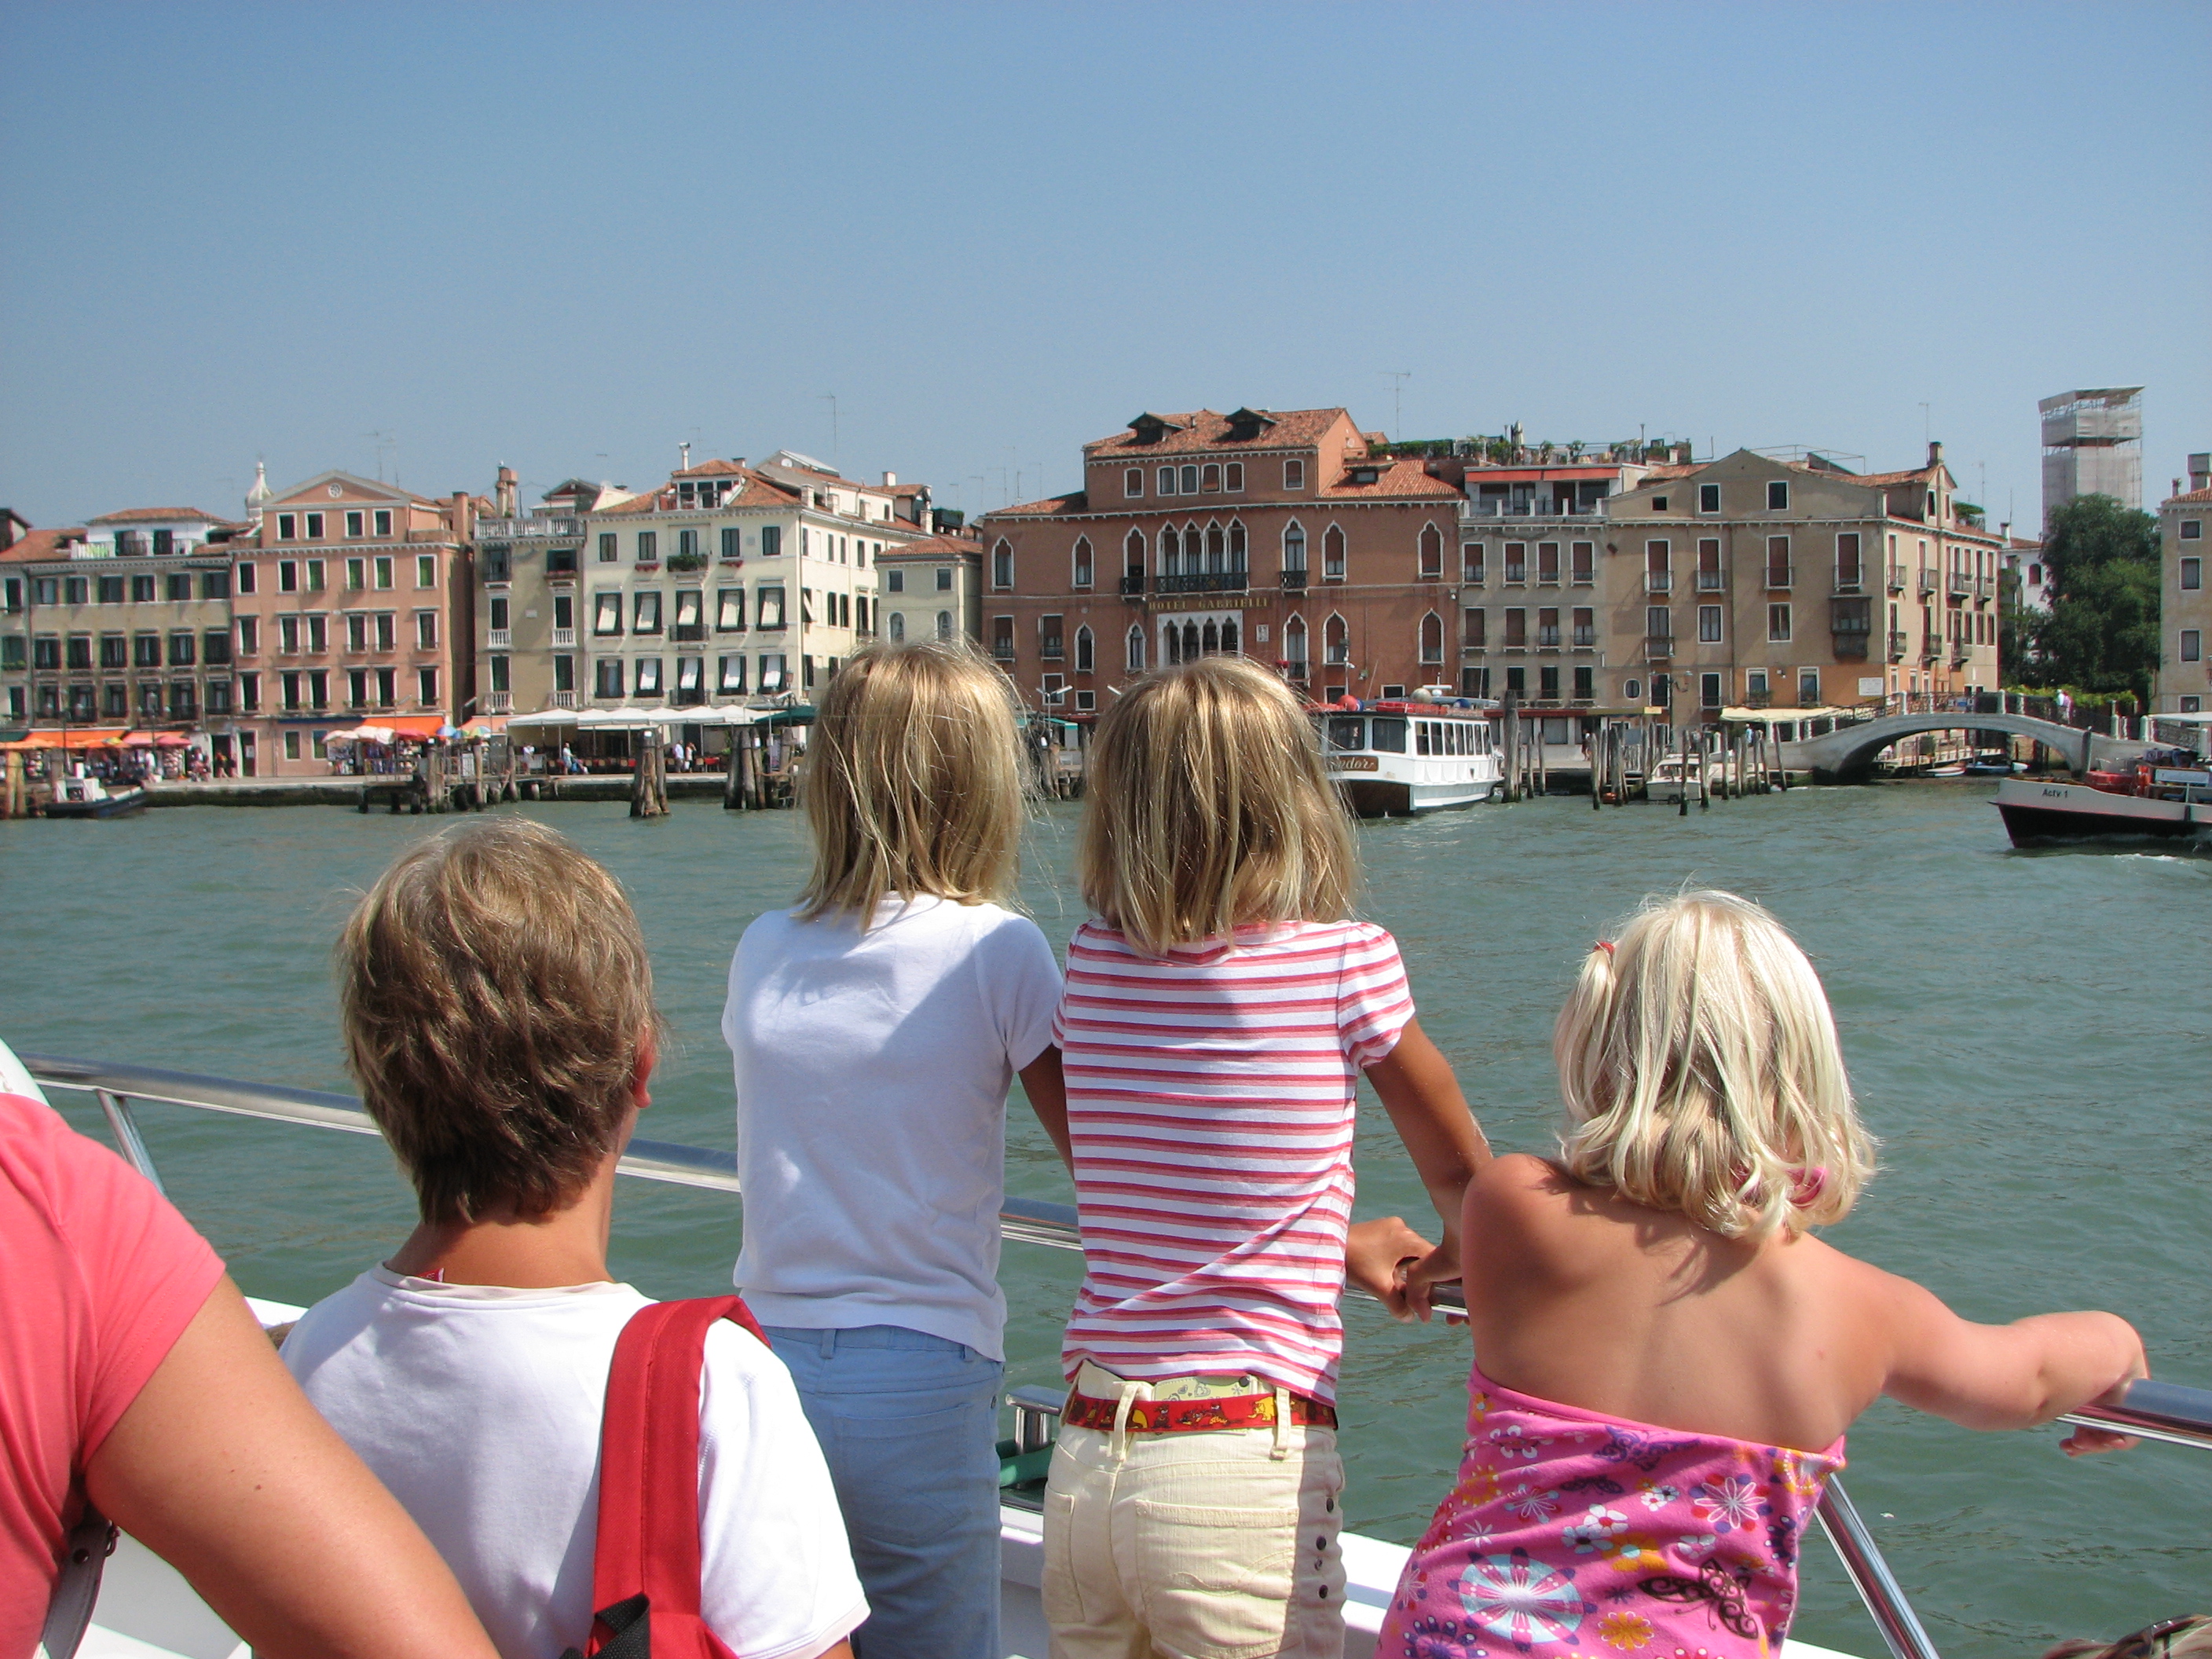 approaching Venice in 2010, Italy